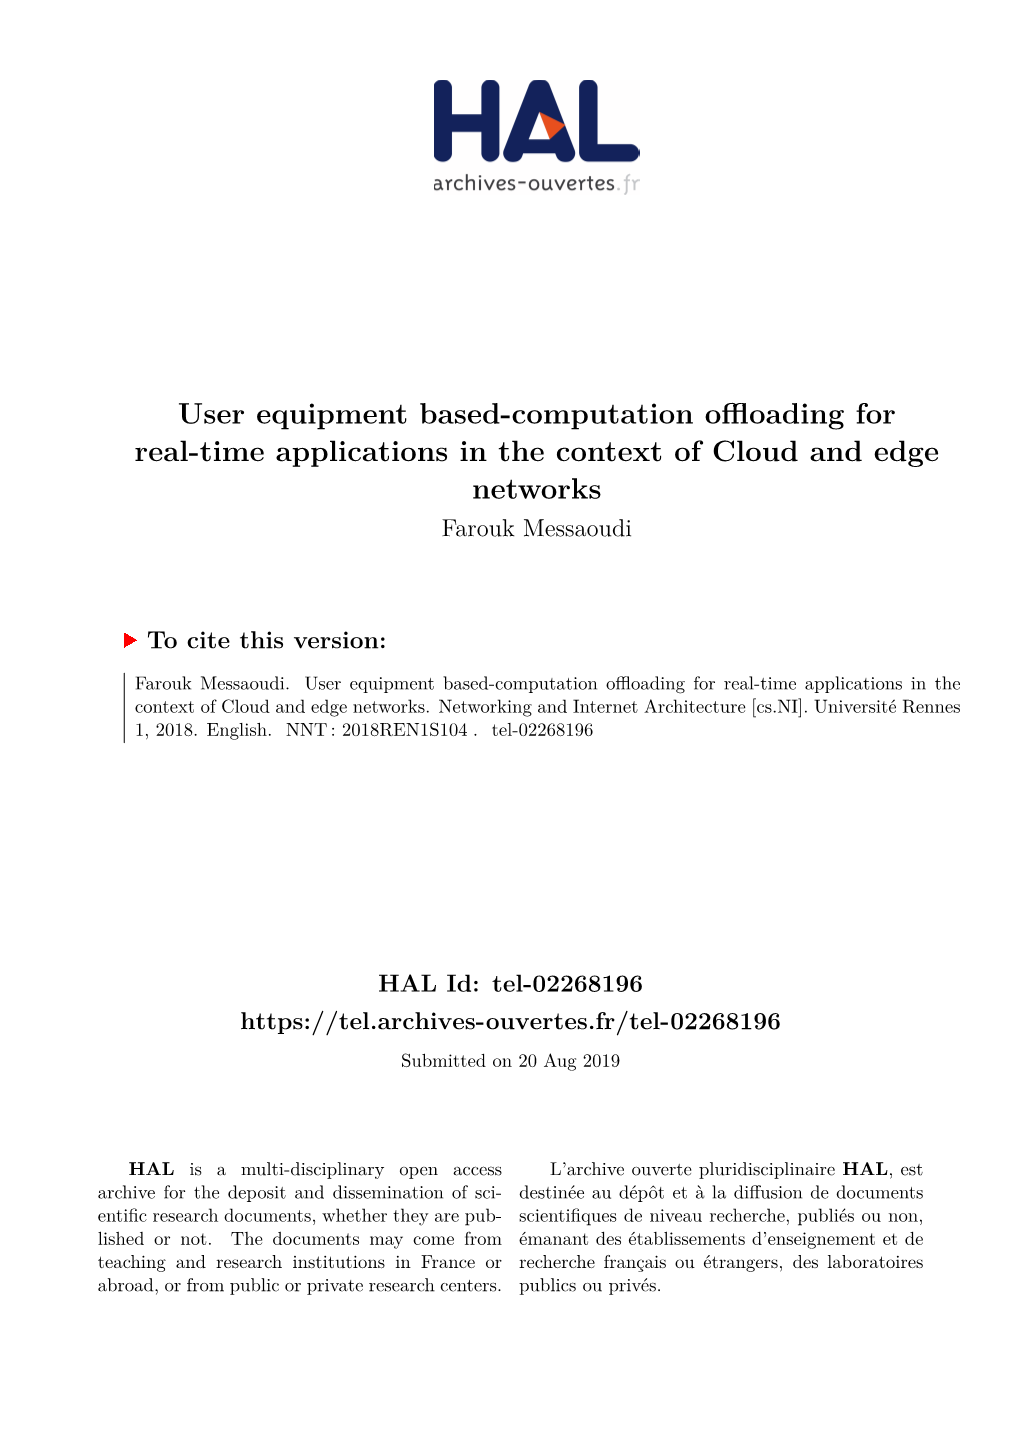 User Equipment Based-Computation Offloading for Real-Time Applications in the Context of Cloud and Edge Networks Farouk Messaoudi